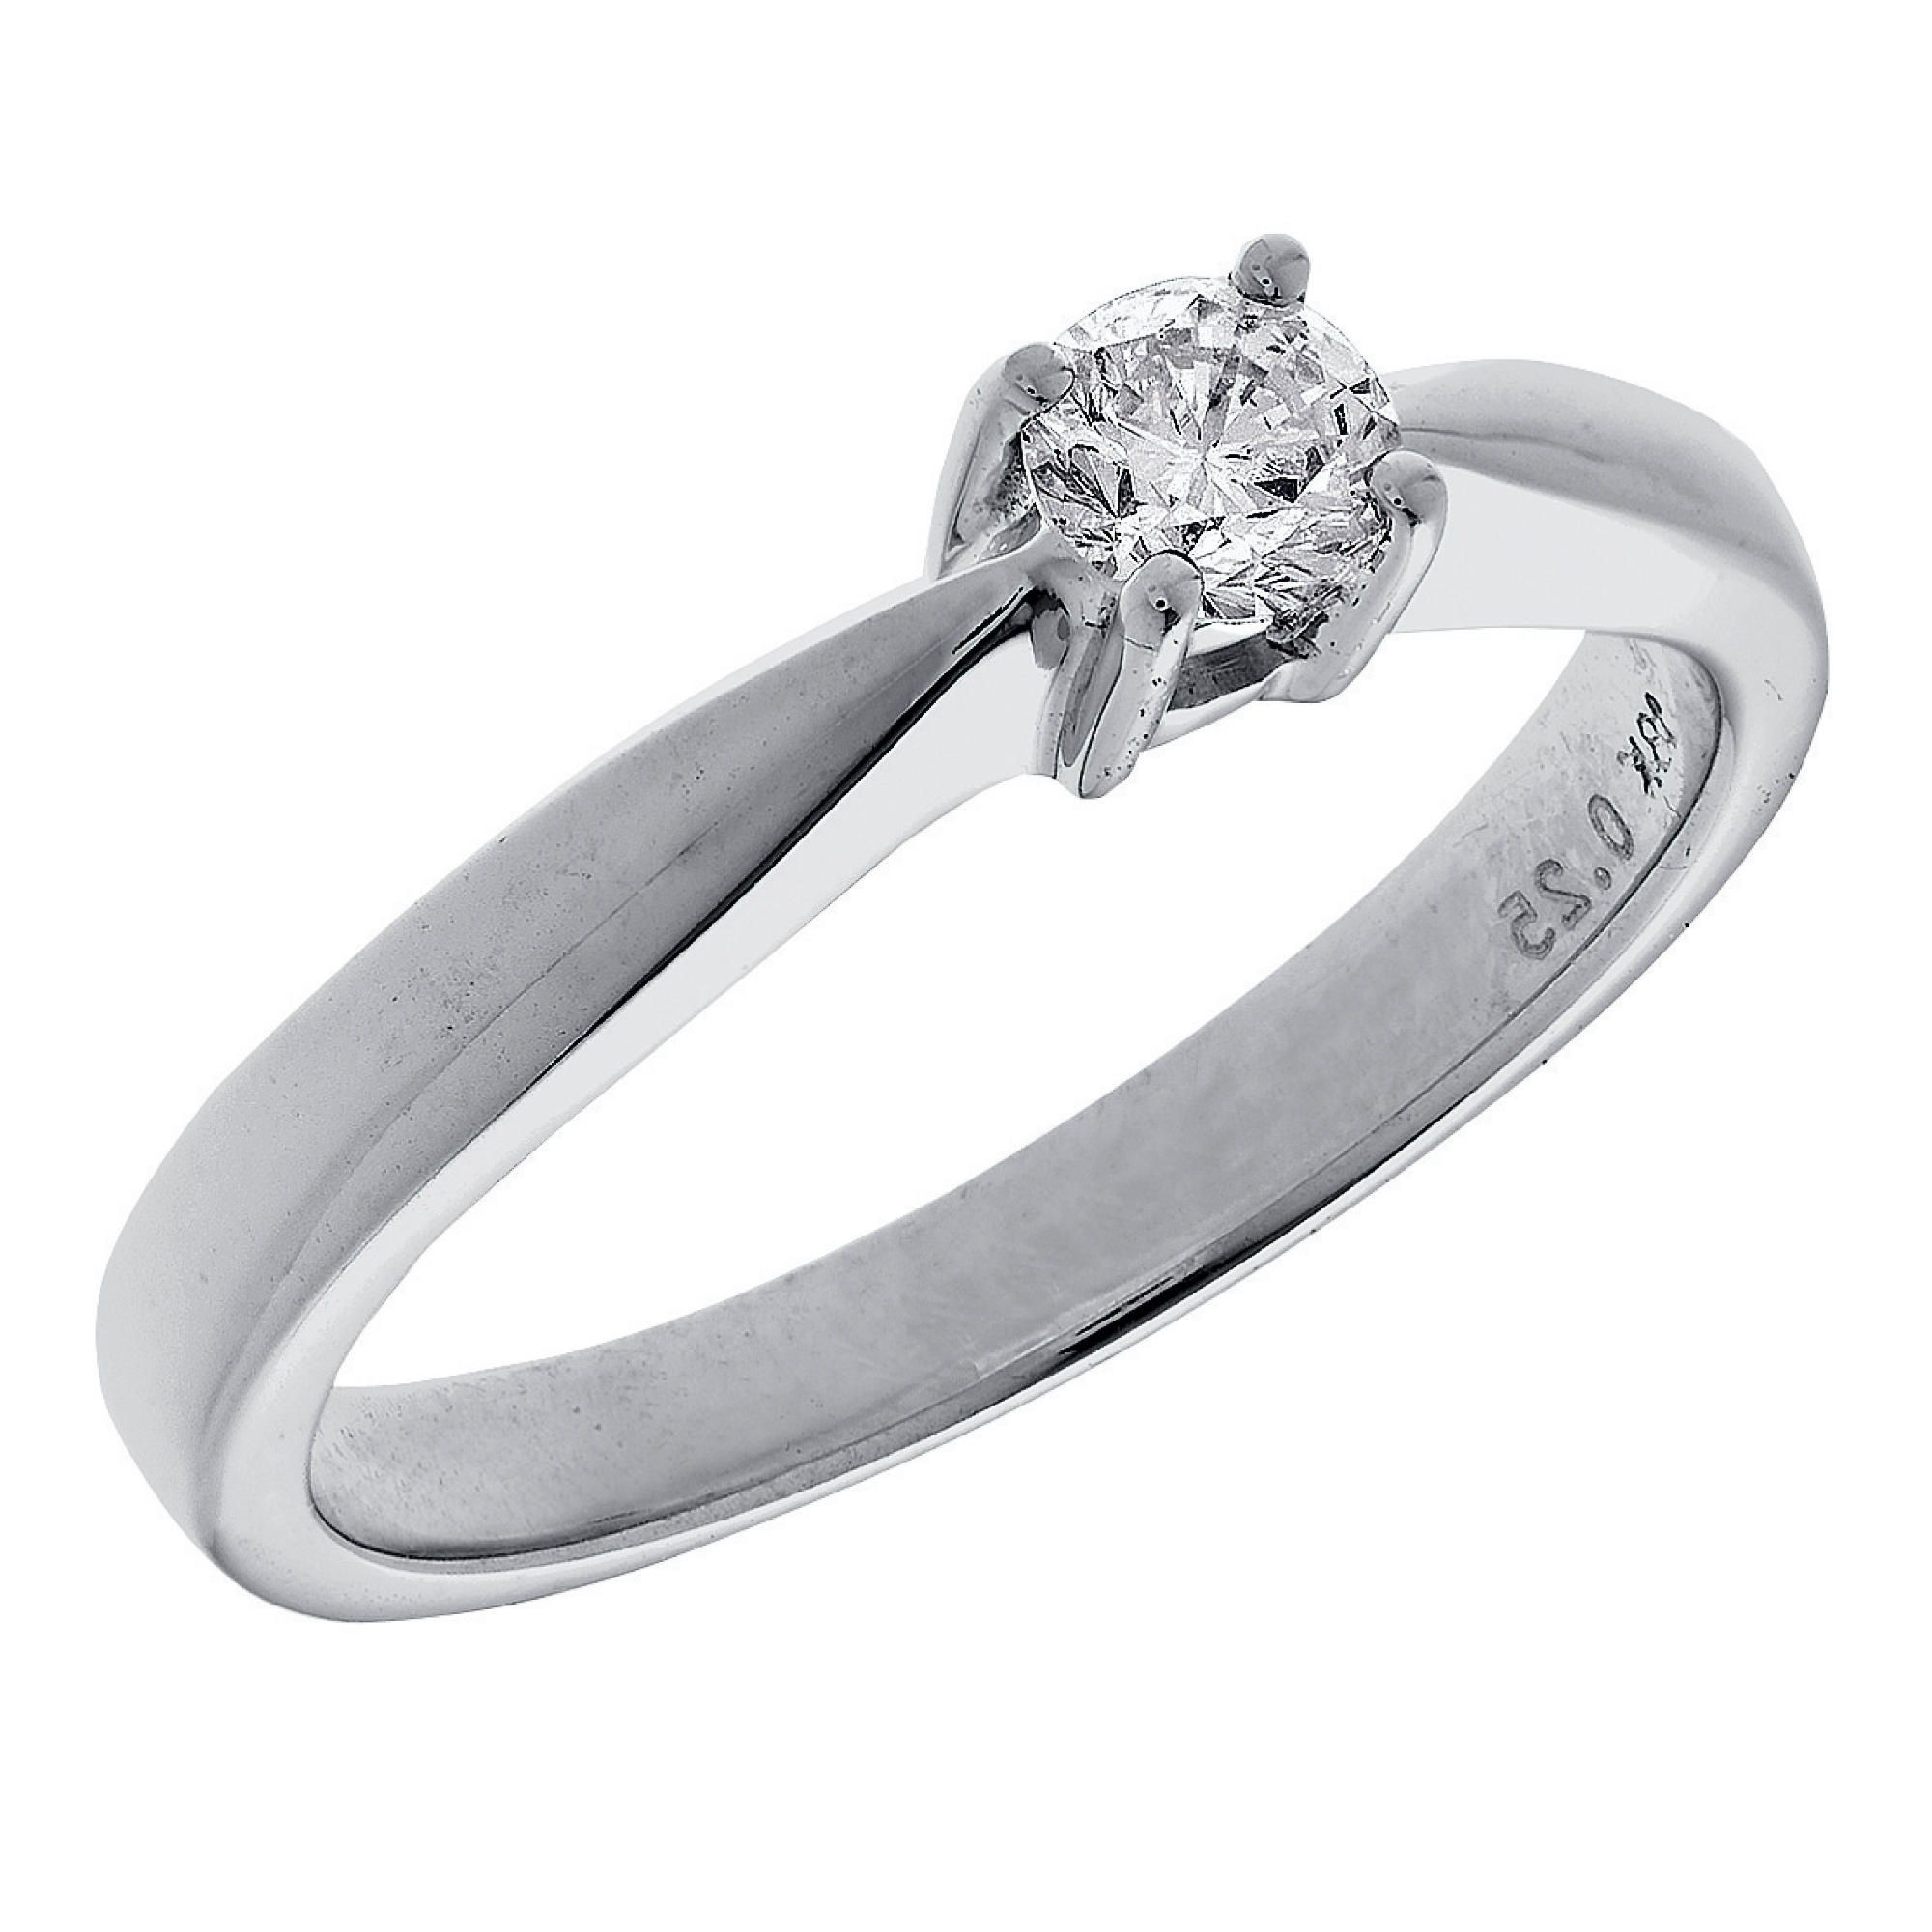 18ct White Gold 25Pt Diamond Solitaire Ring, P at Tesco Direct